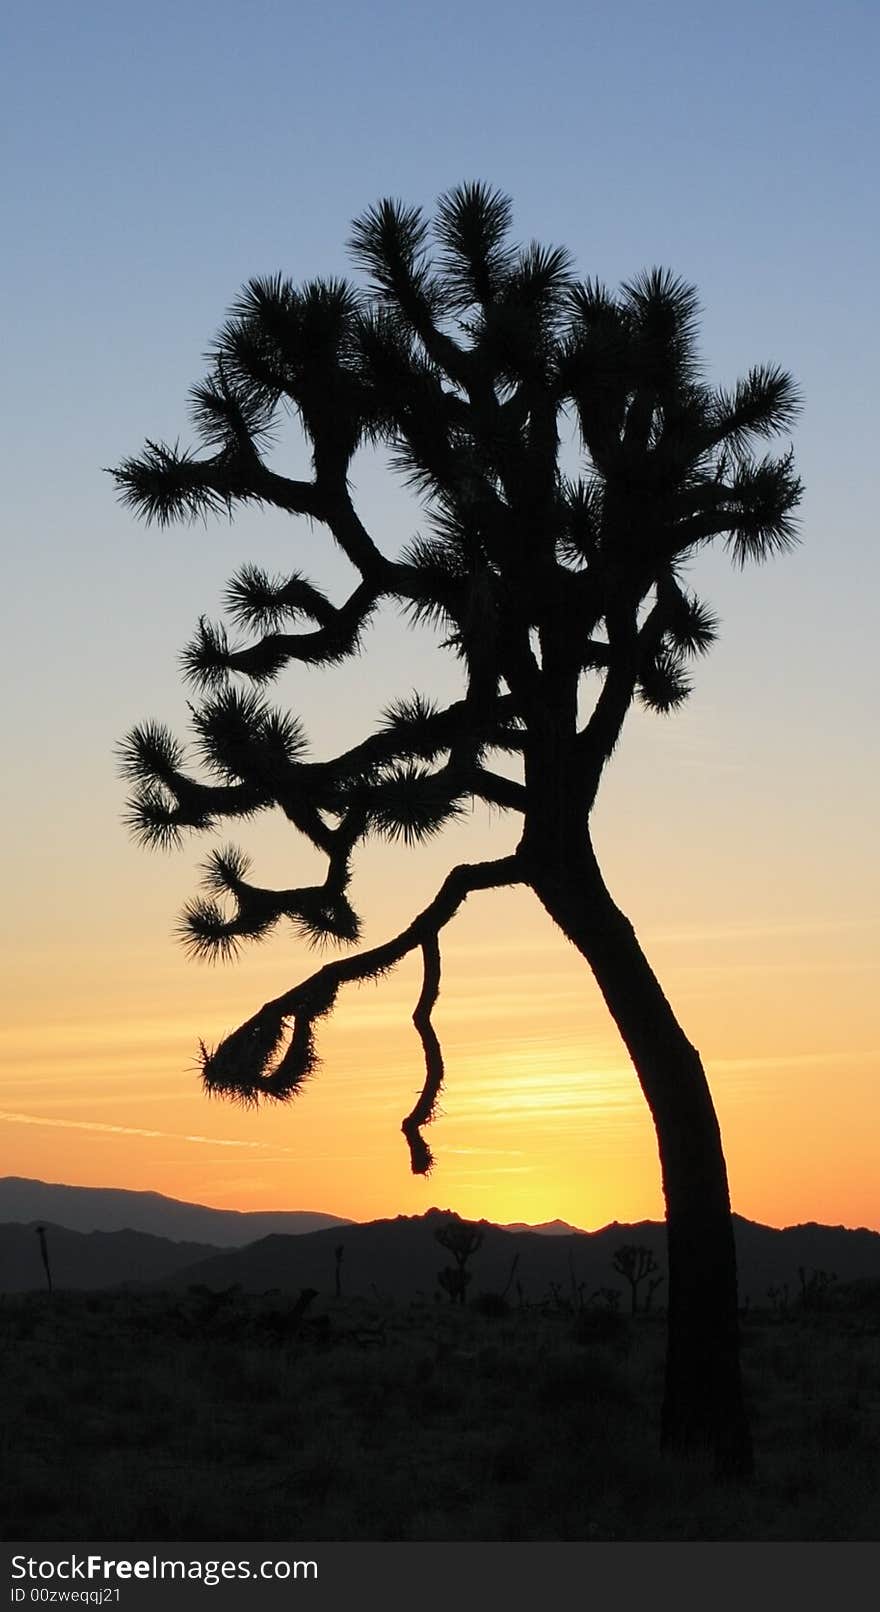 Bright sunset with the silhouette of a joshua tree.